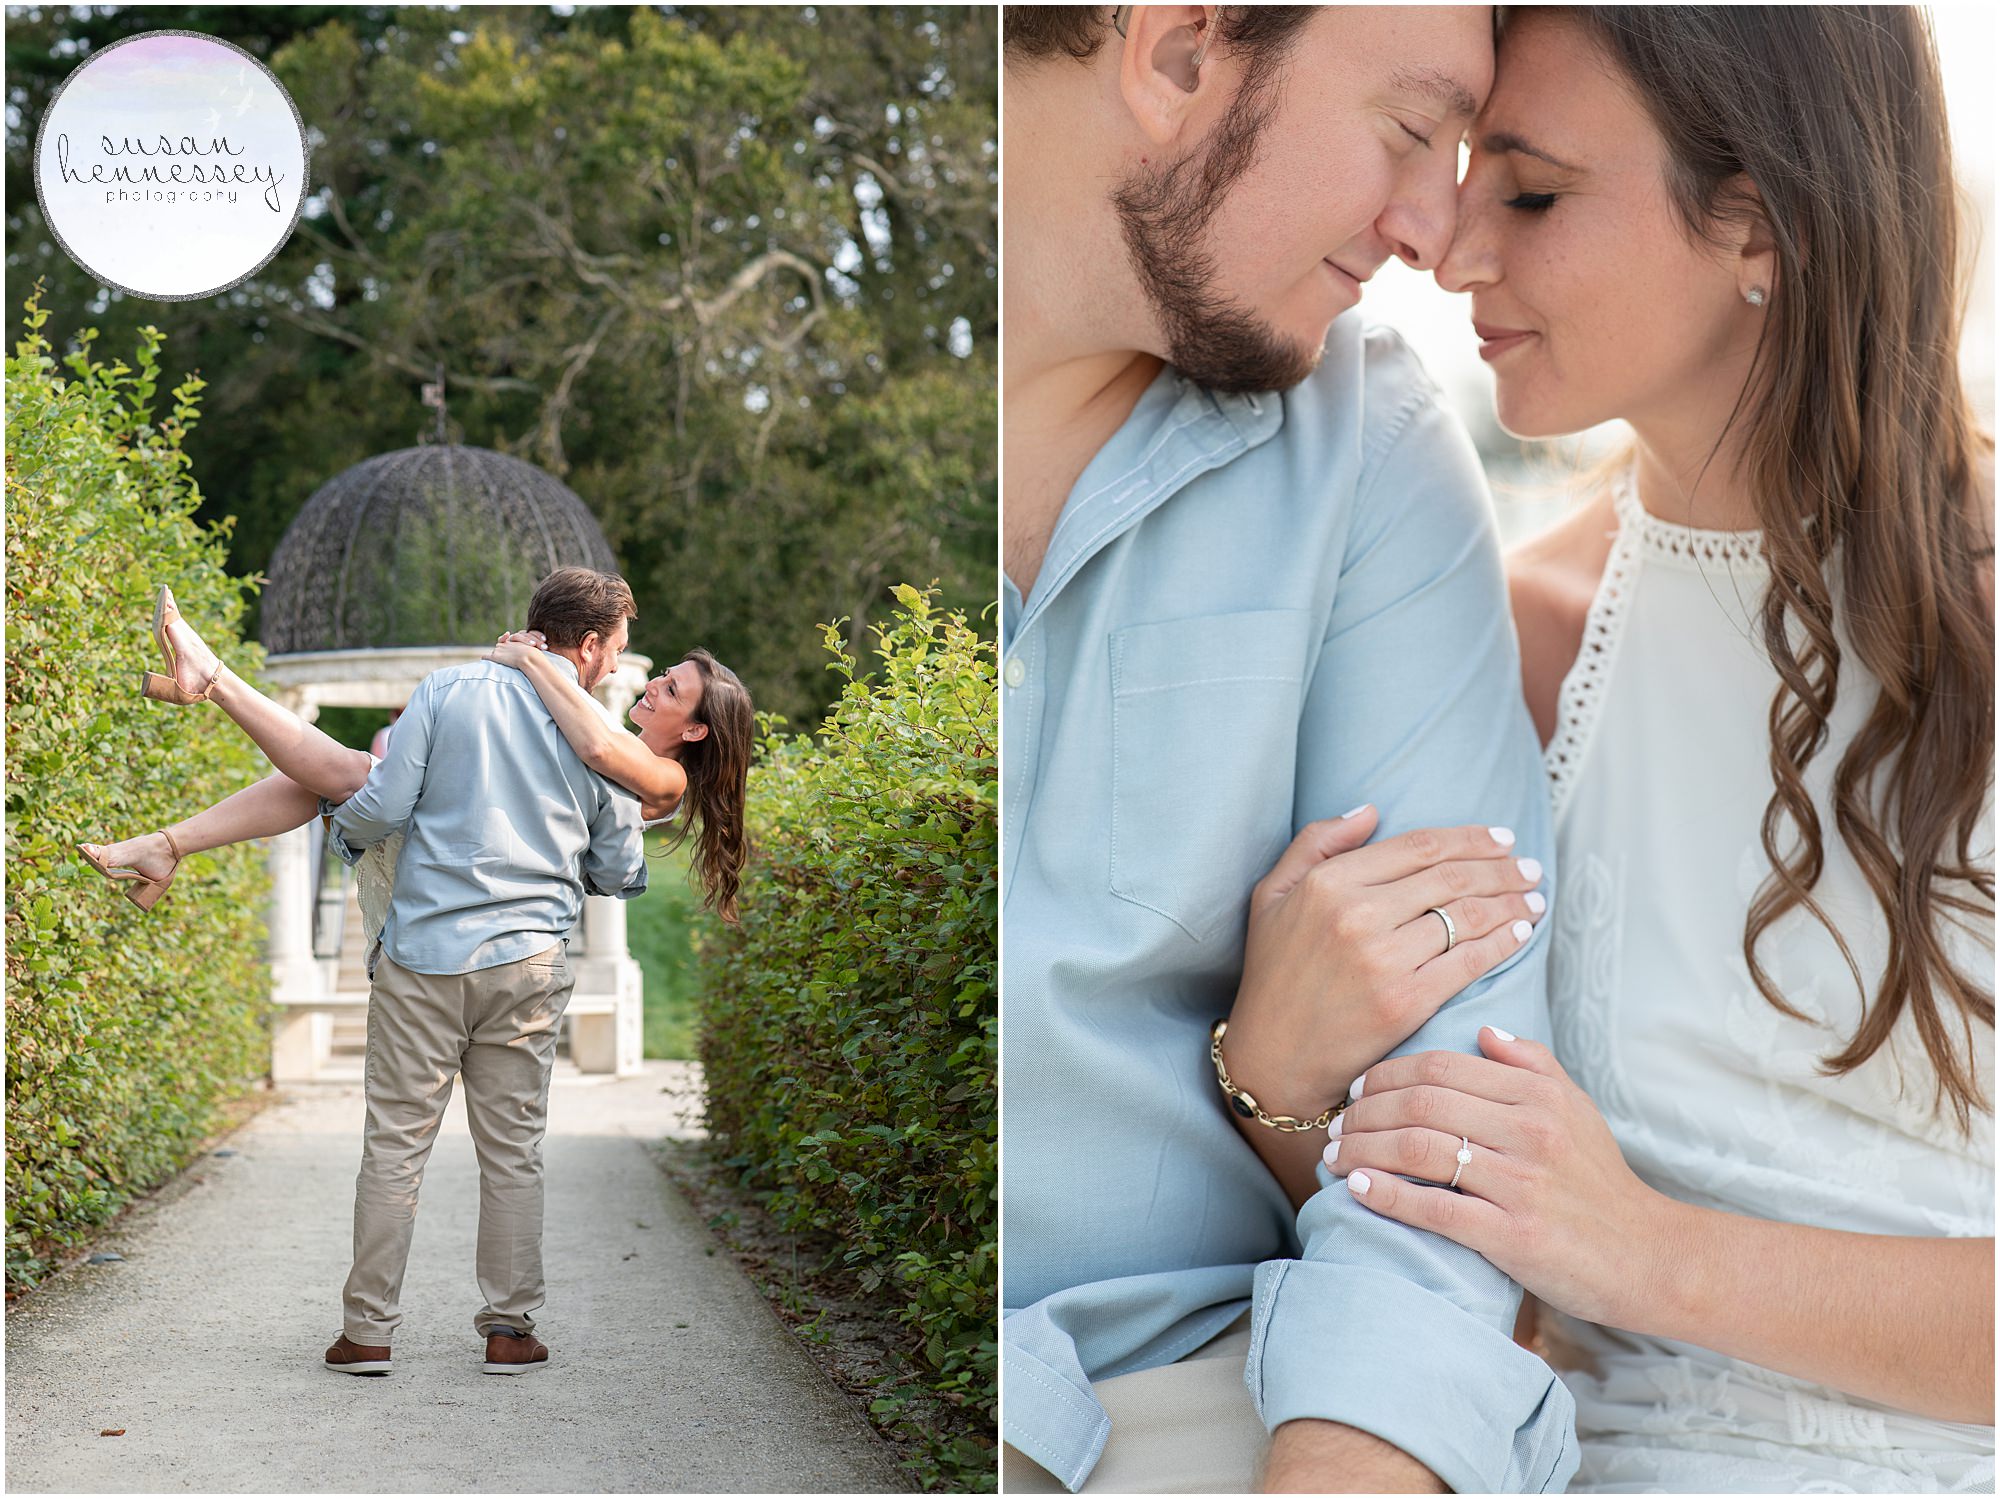 Nicole and Christian had a summer Engagement Session at Longwood Gardens